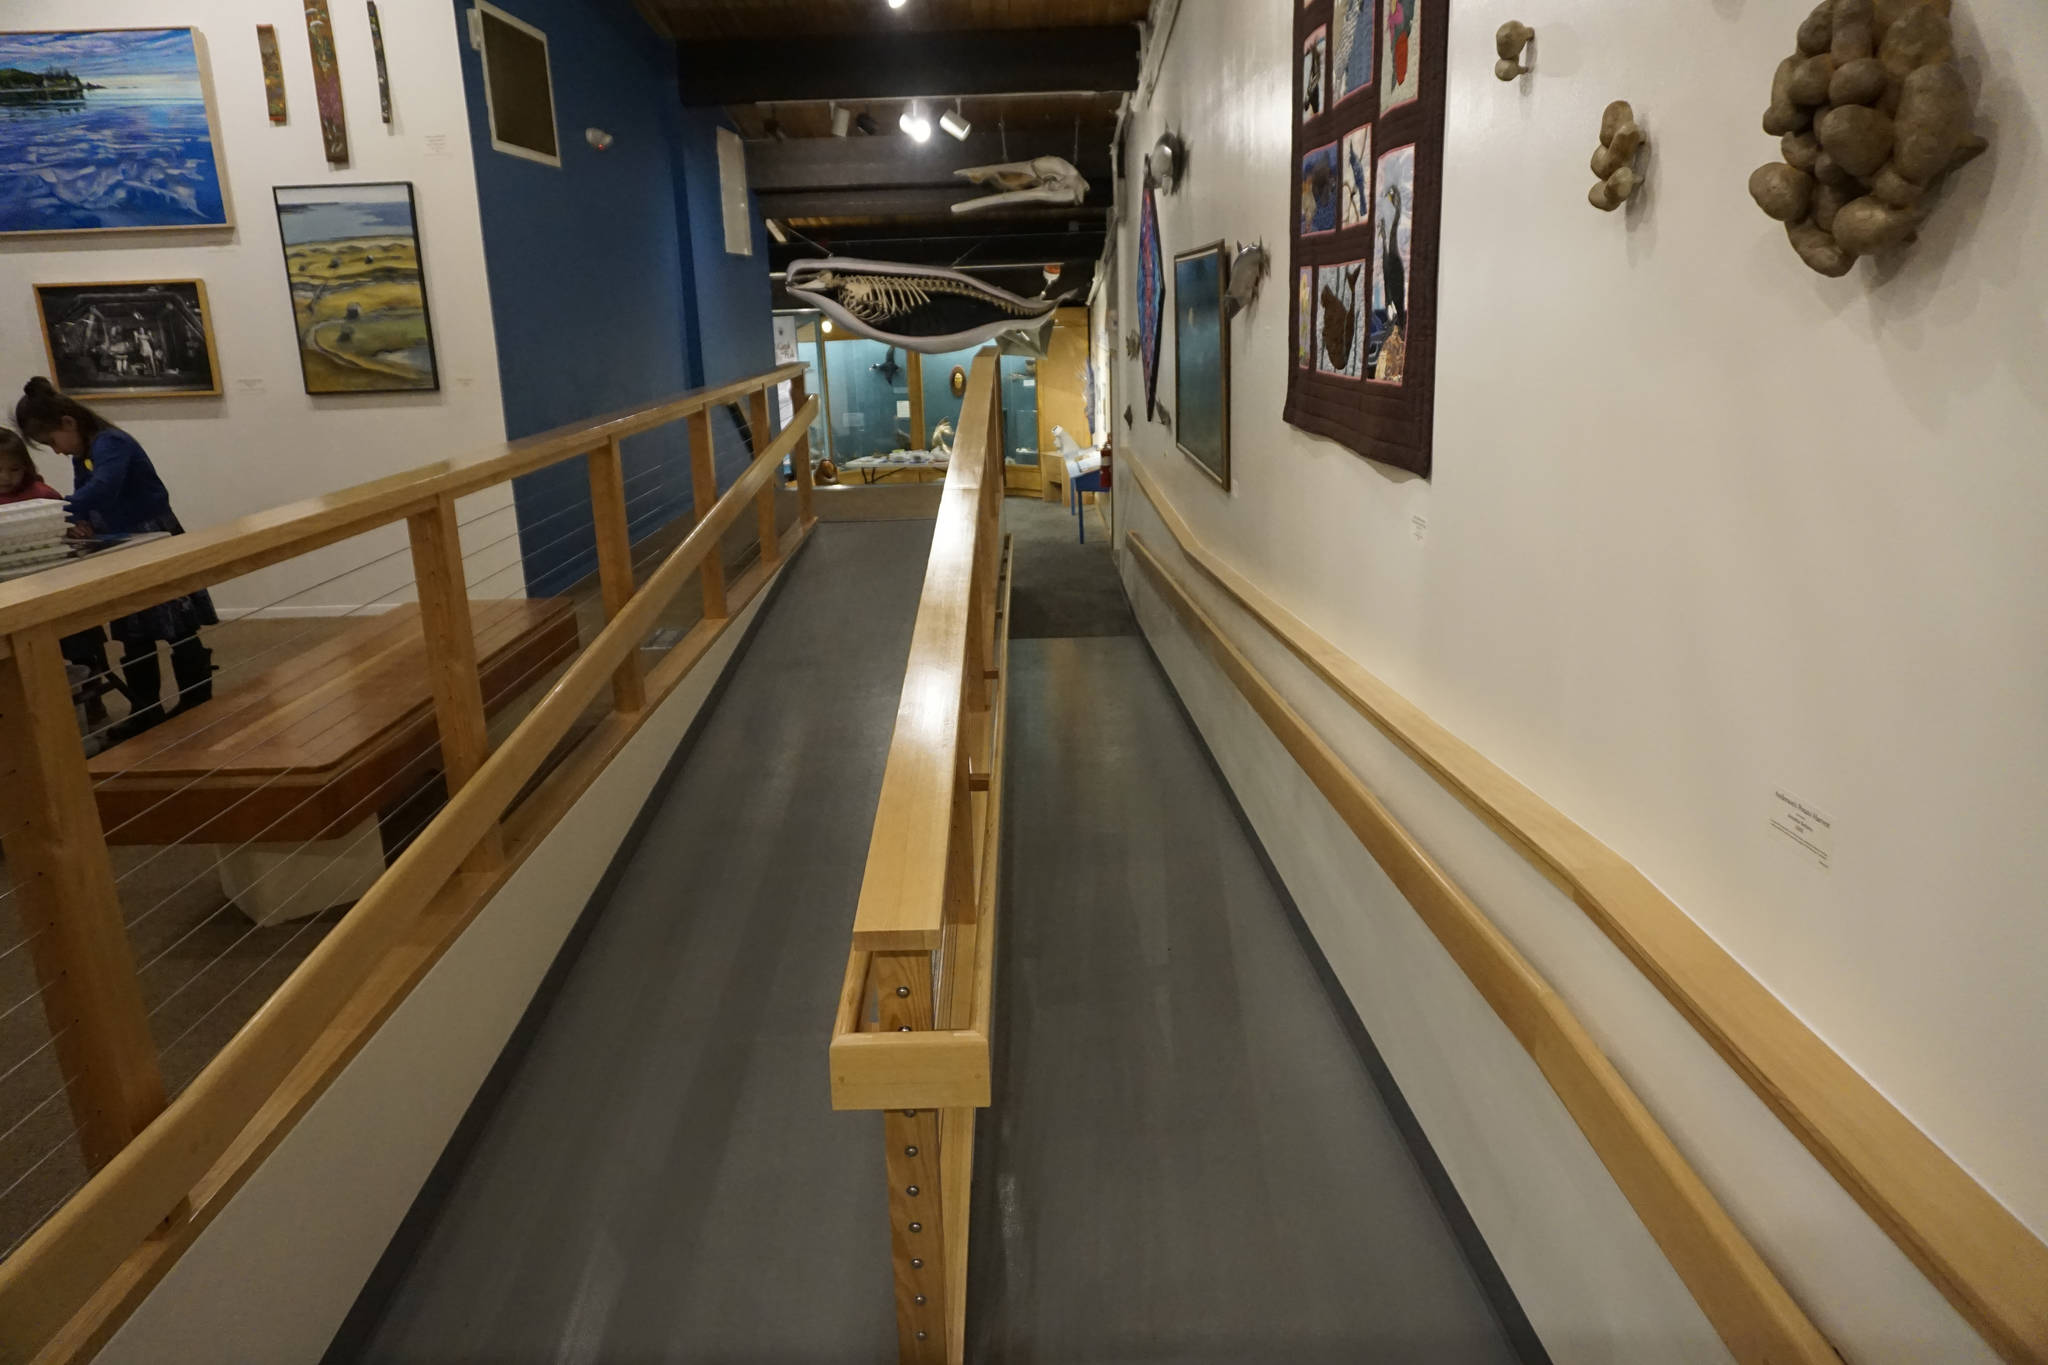 A new ramp connects the main floor of the Pratt Museum to the Marine Gallery, as seen here in this photo taken at the museum’s grand reopening on May 25, 2019, in Homer, Alaska. (Photo by Michael Armstrong/Homer News)